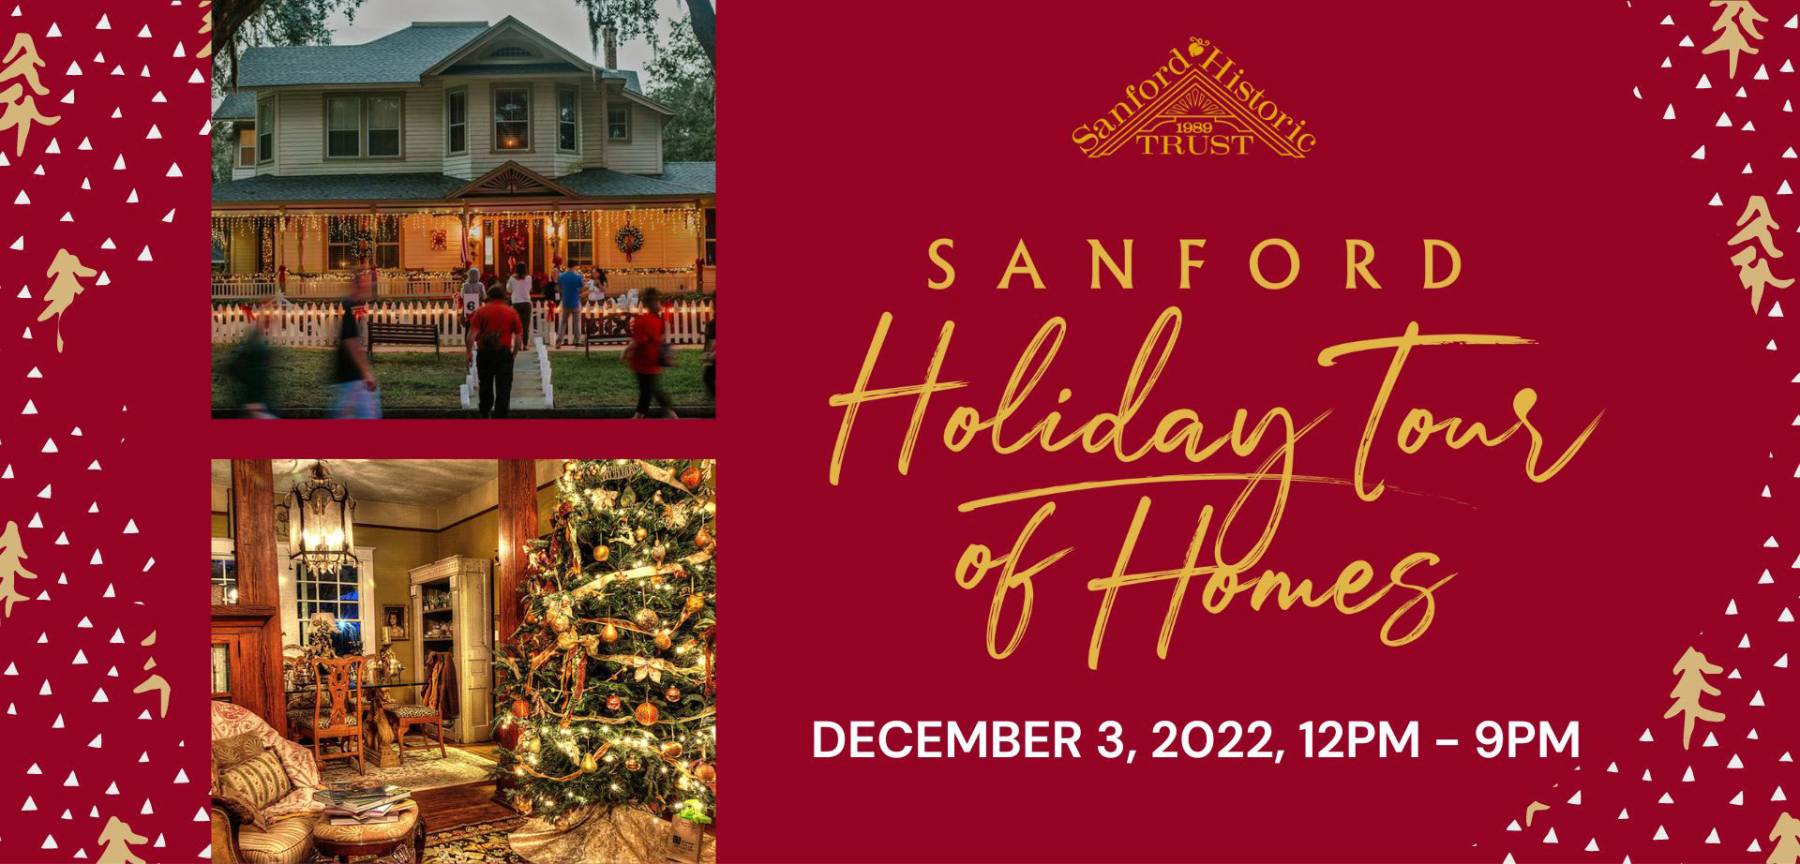 33rd Annual Sanford Holiday Tour of Homes